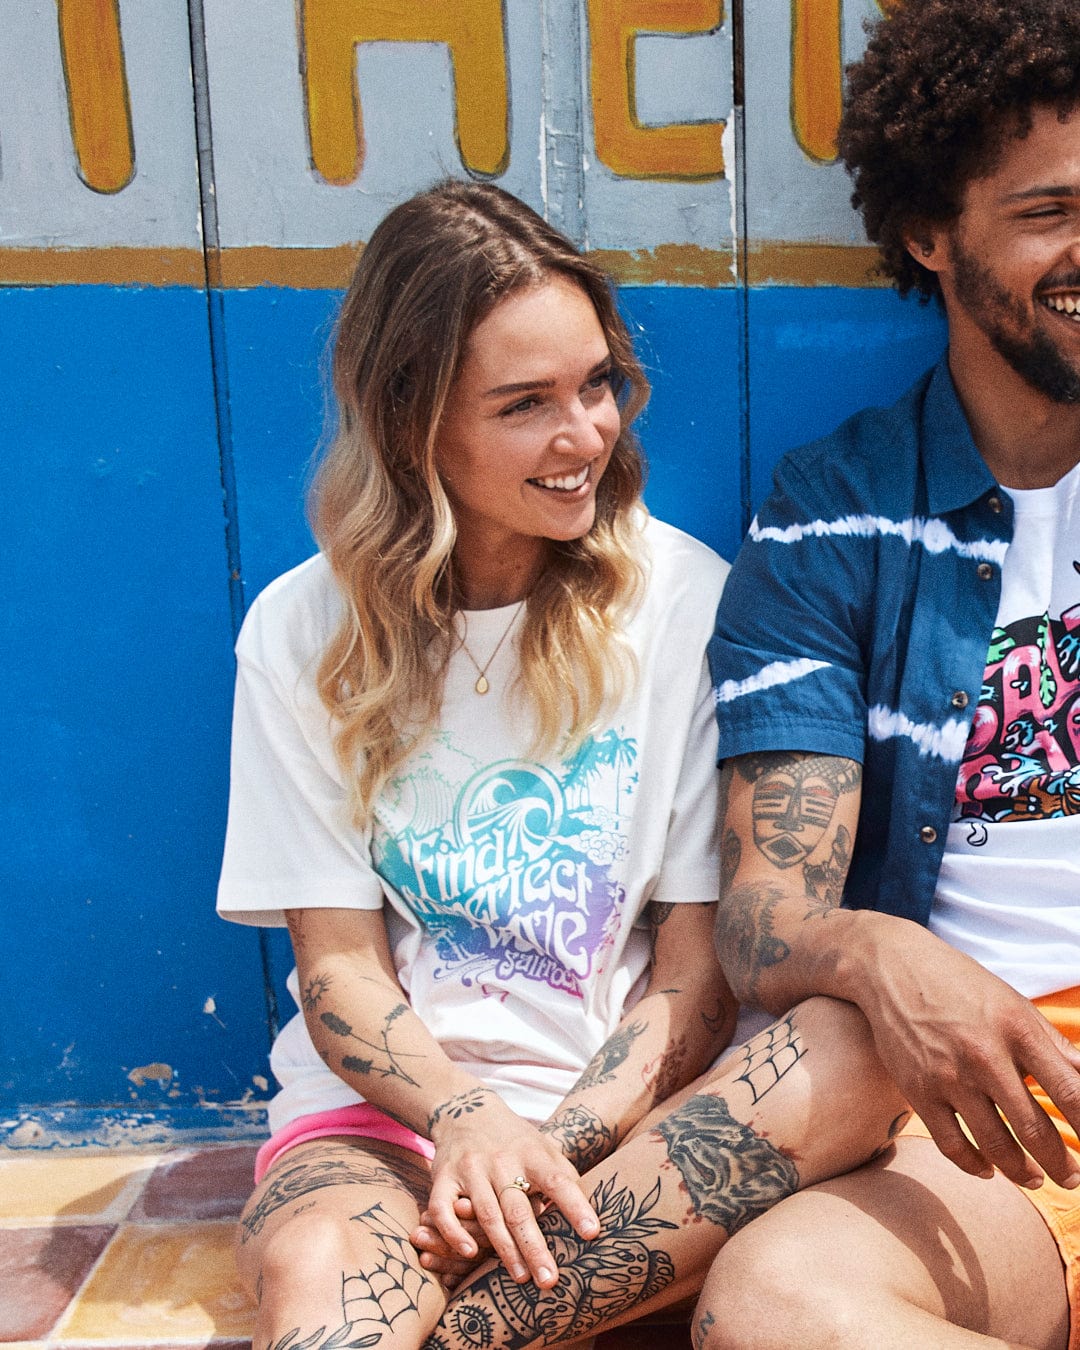 A young man and woman with tattoos sitting and laughing in front of a multi-coloured graffiti wall, wearing the Find The Perfect Wave - Womens Short Sleeve T-Shirt by Saltrock.